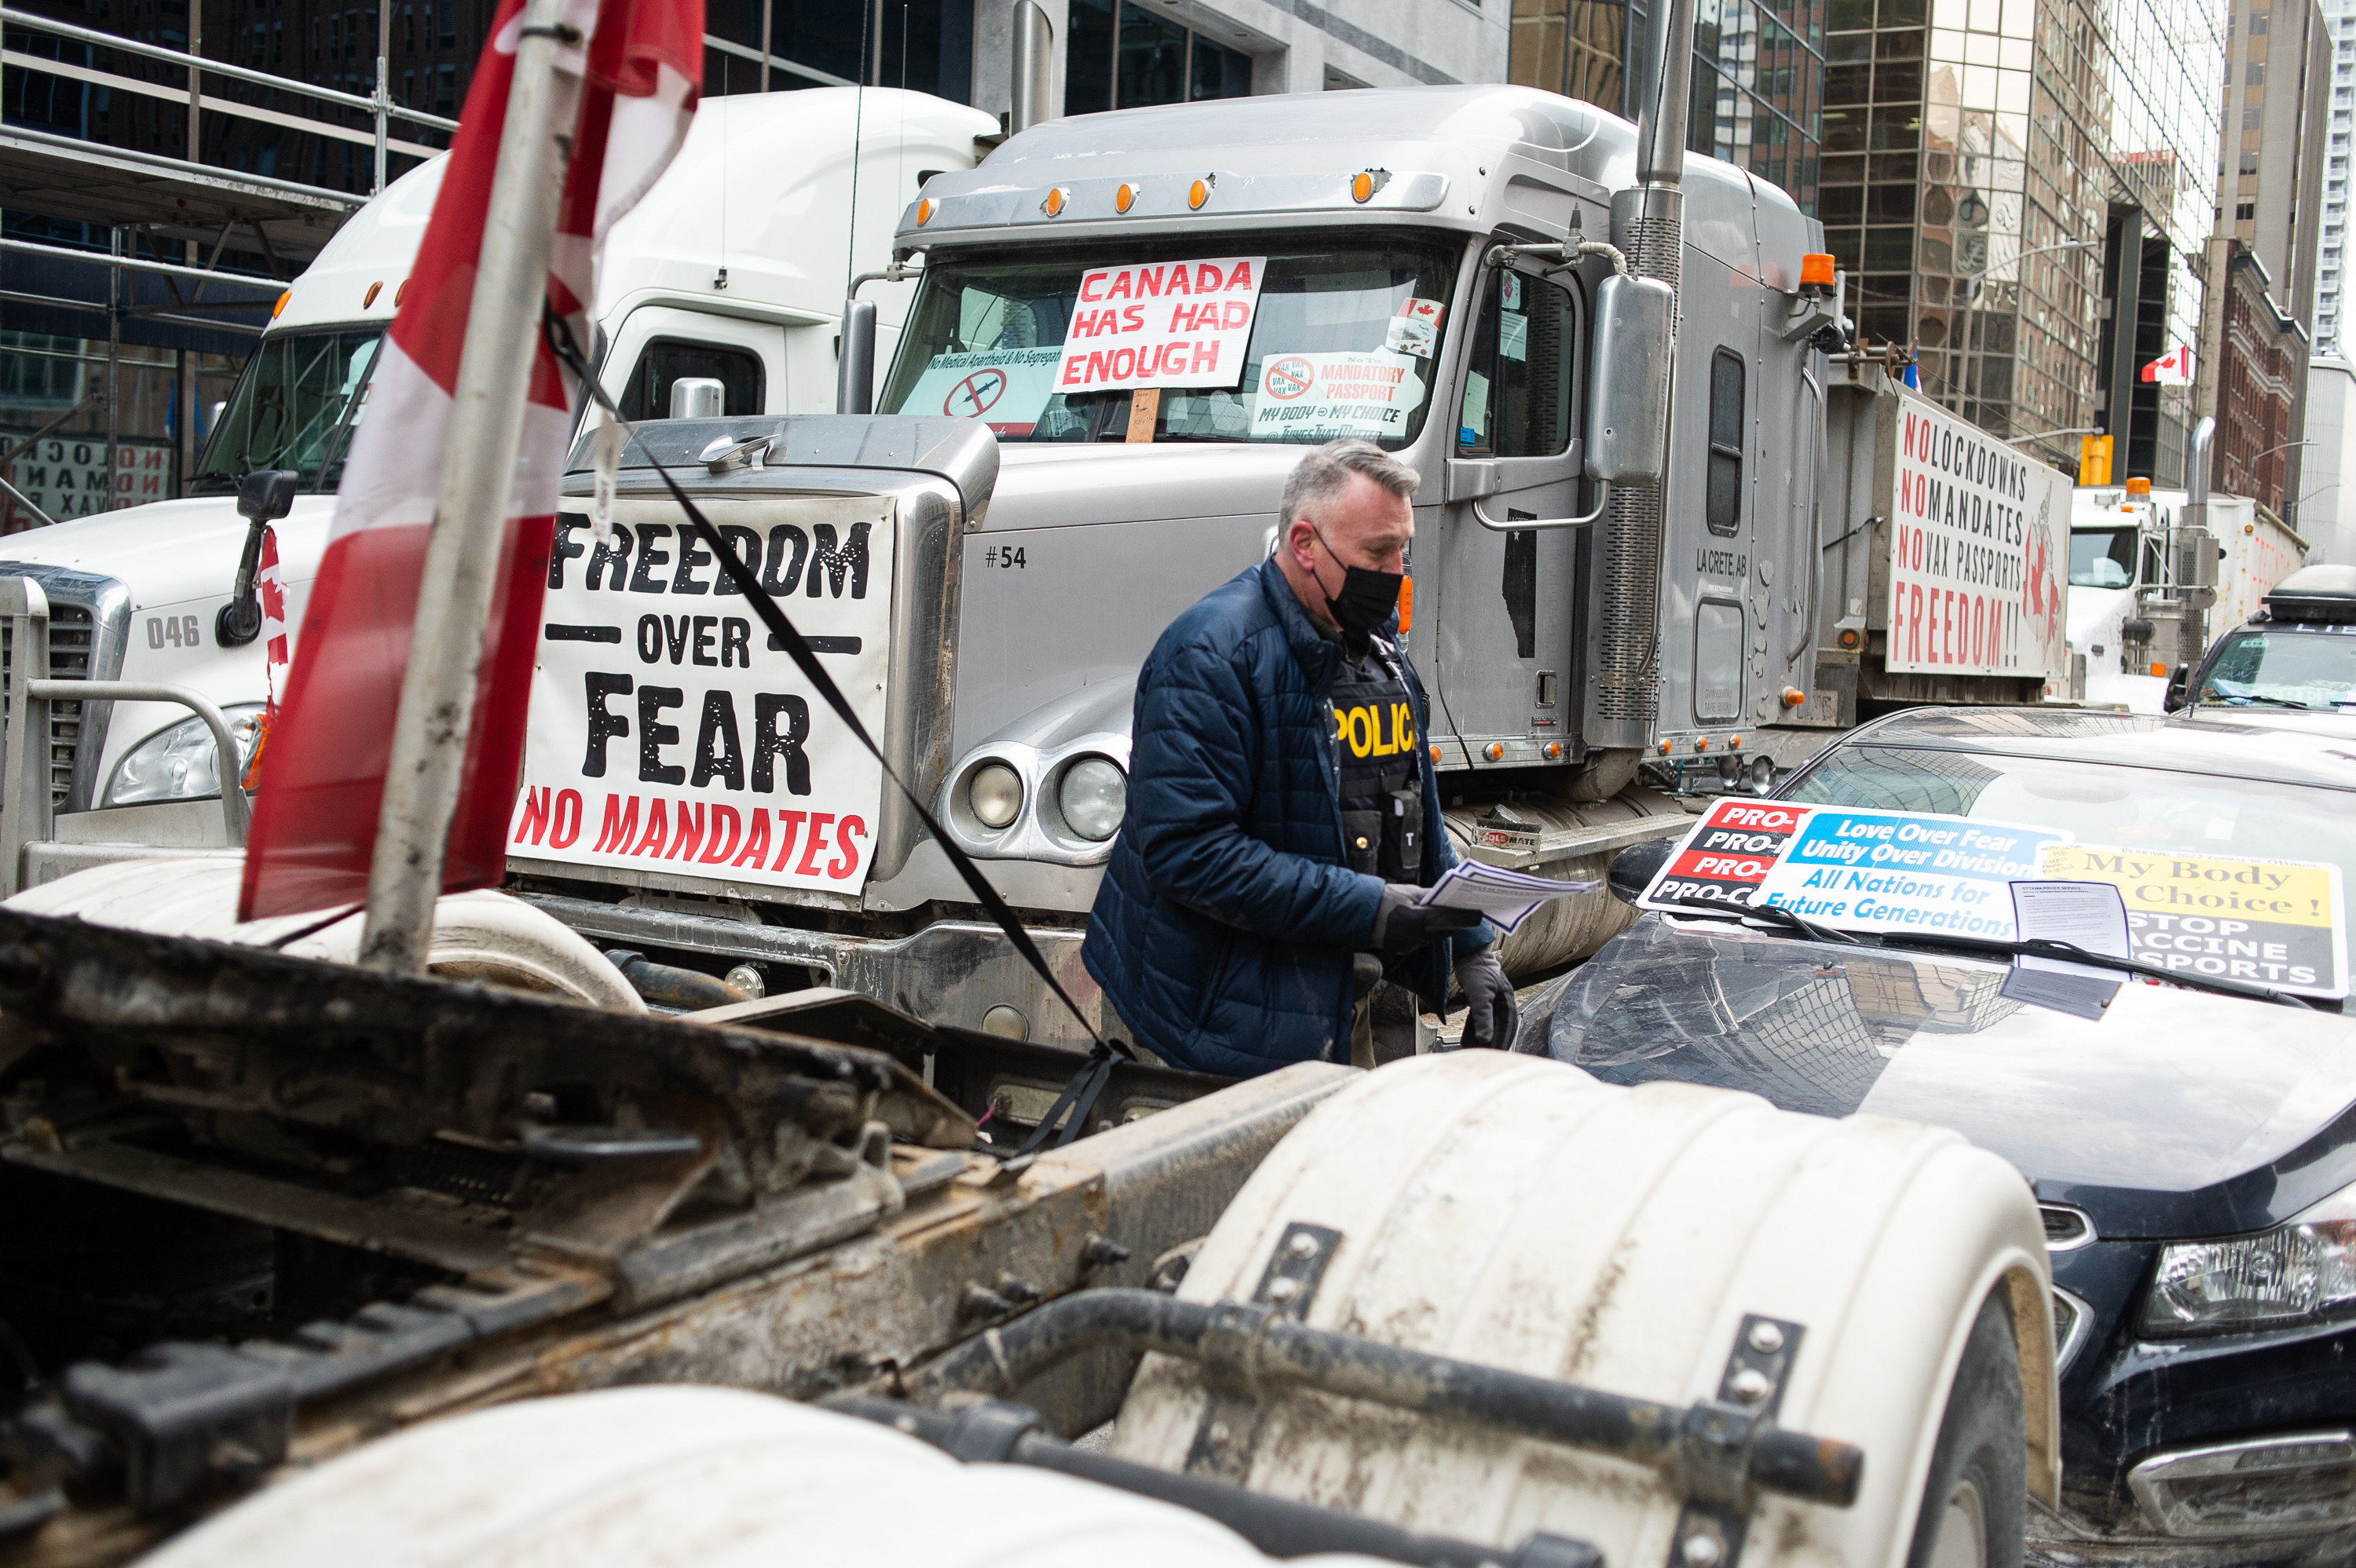 An officer wearing a vest labeled &quot;police&quot; carries a stack of flyers and places on under a windshield beside a big rig with signs posted reading &quot;freedom over fear, no mandates&quot; and &quot;Canada has had enough&quot;